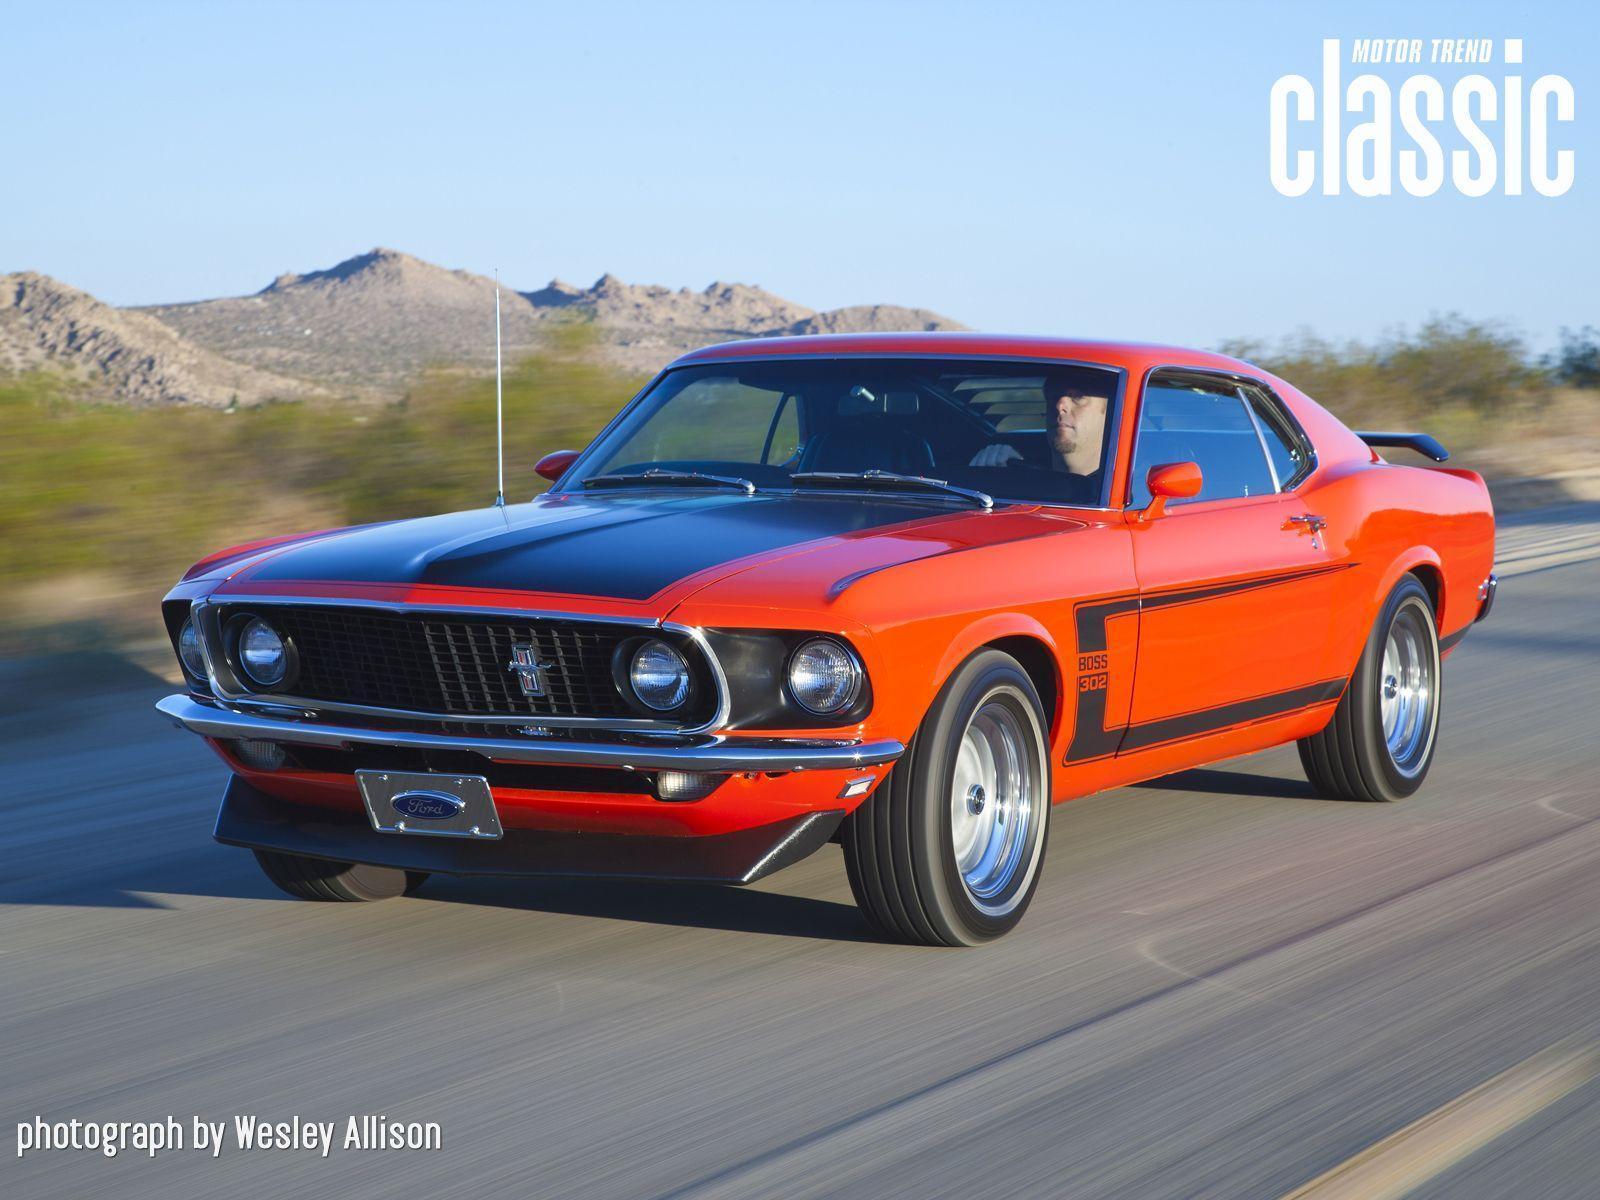 Ford Mustang Boss 302 Wallpaper Gallery Trend Classic